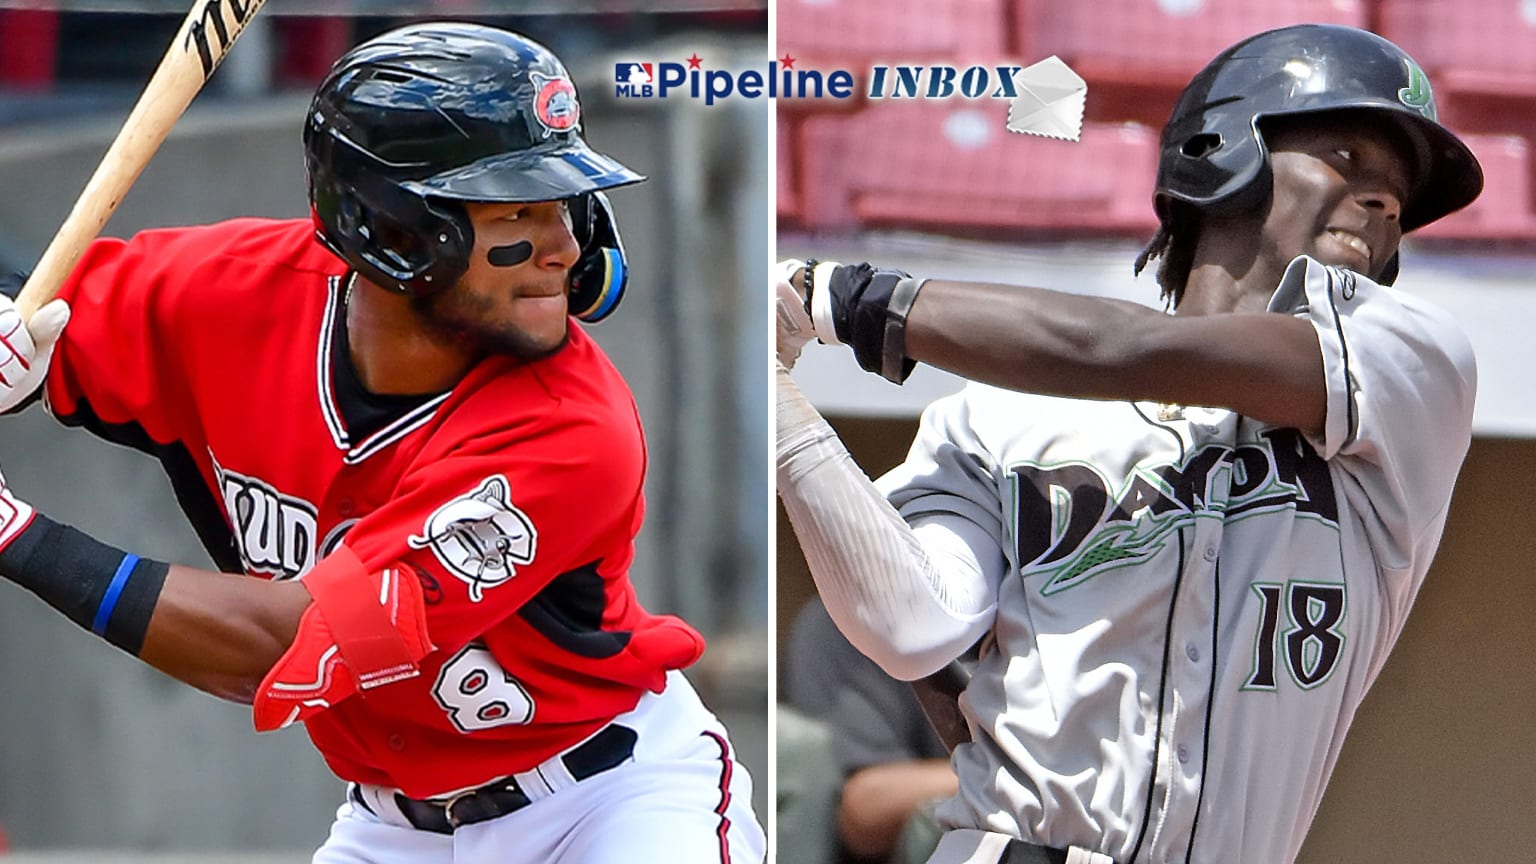 A split image showing two prospects at bat